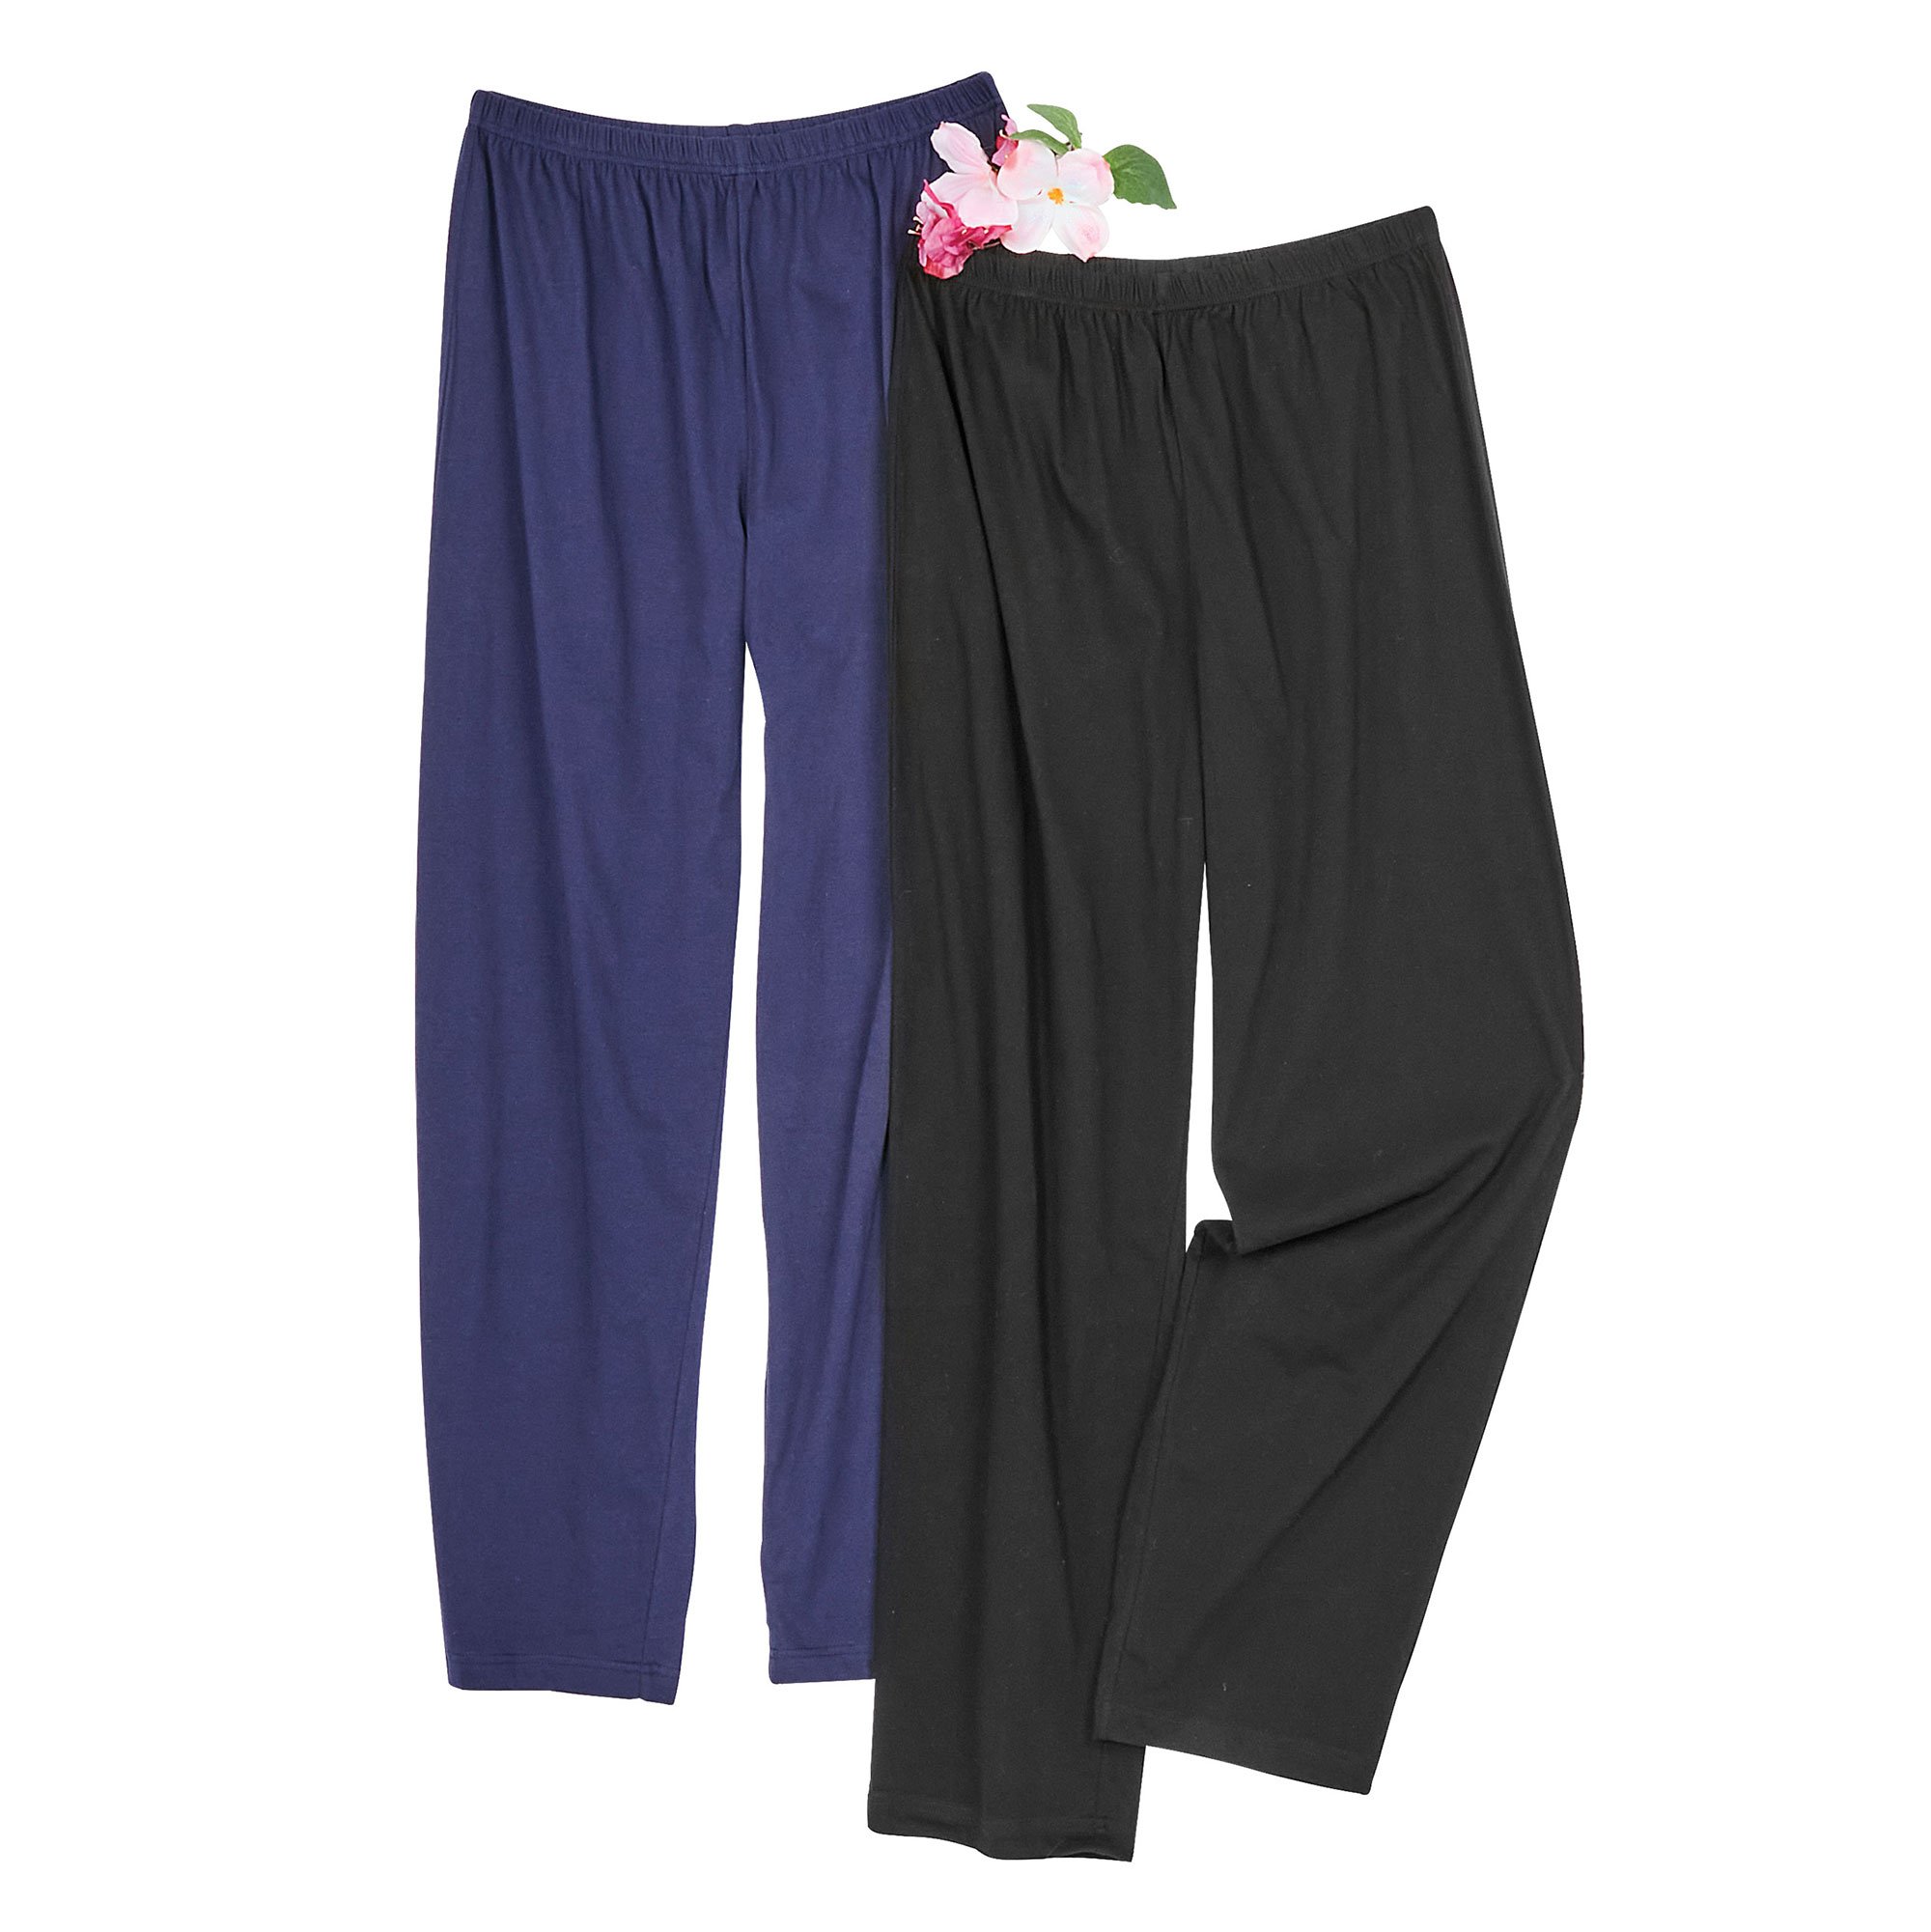 Pull-On Pants - 2 Pack